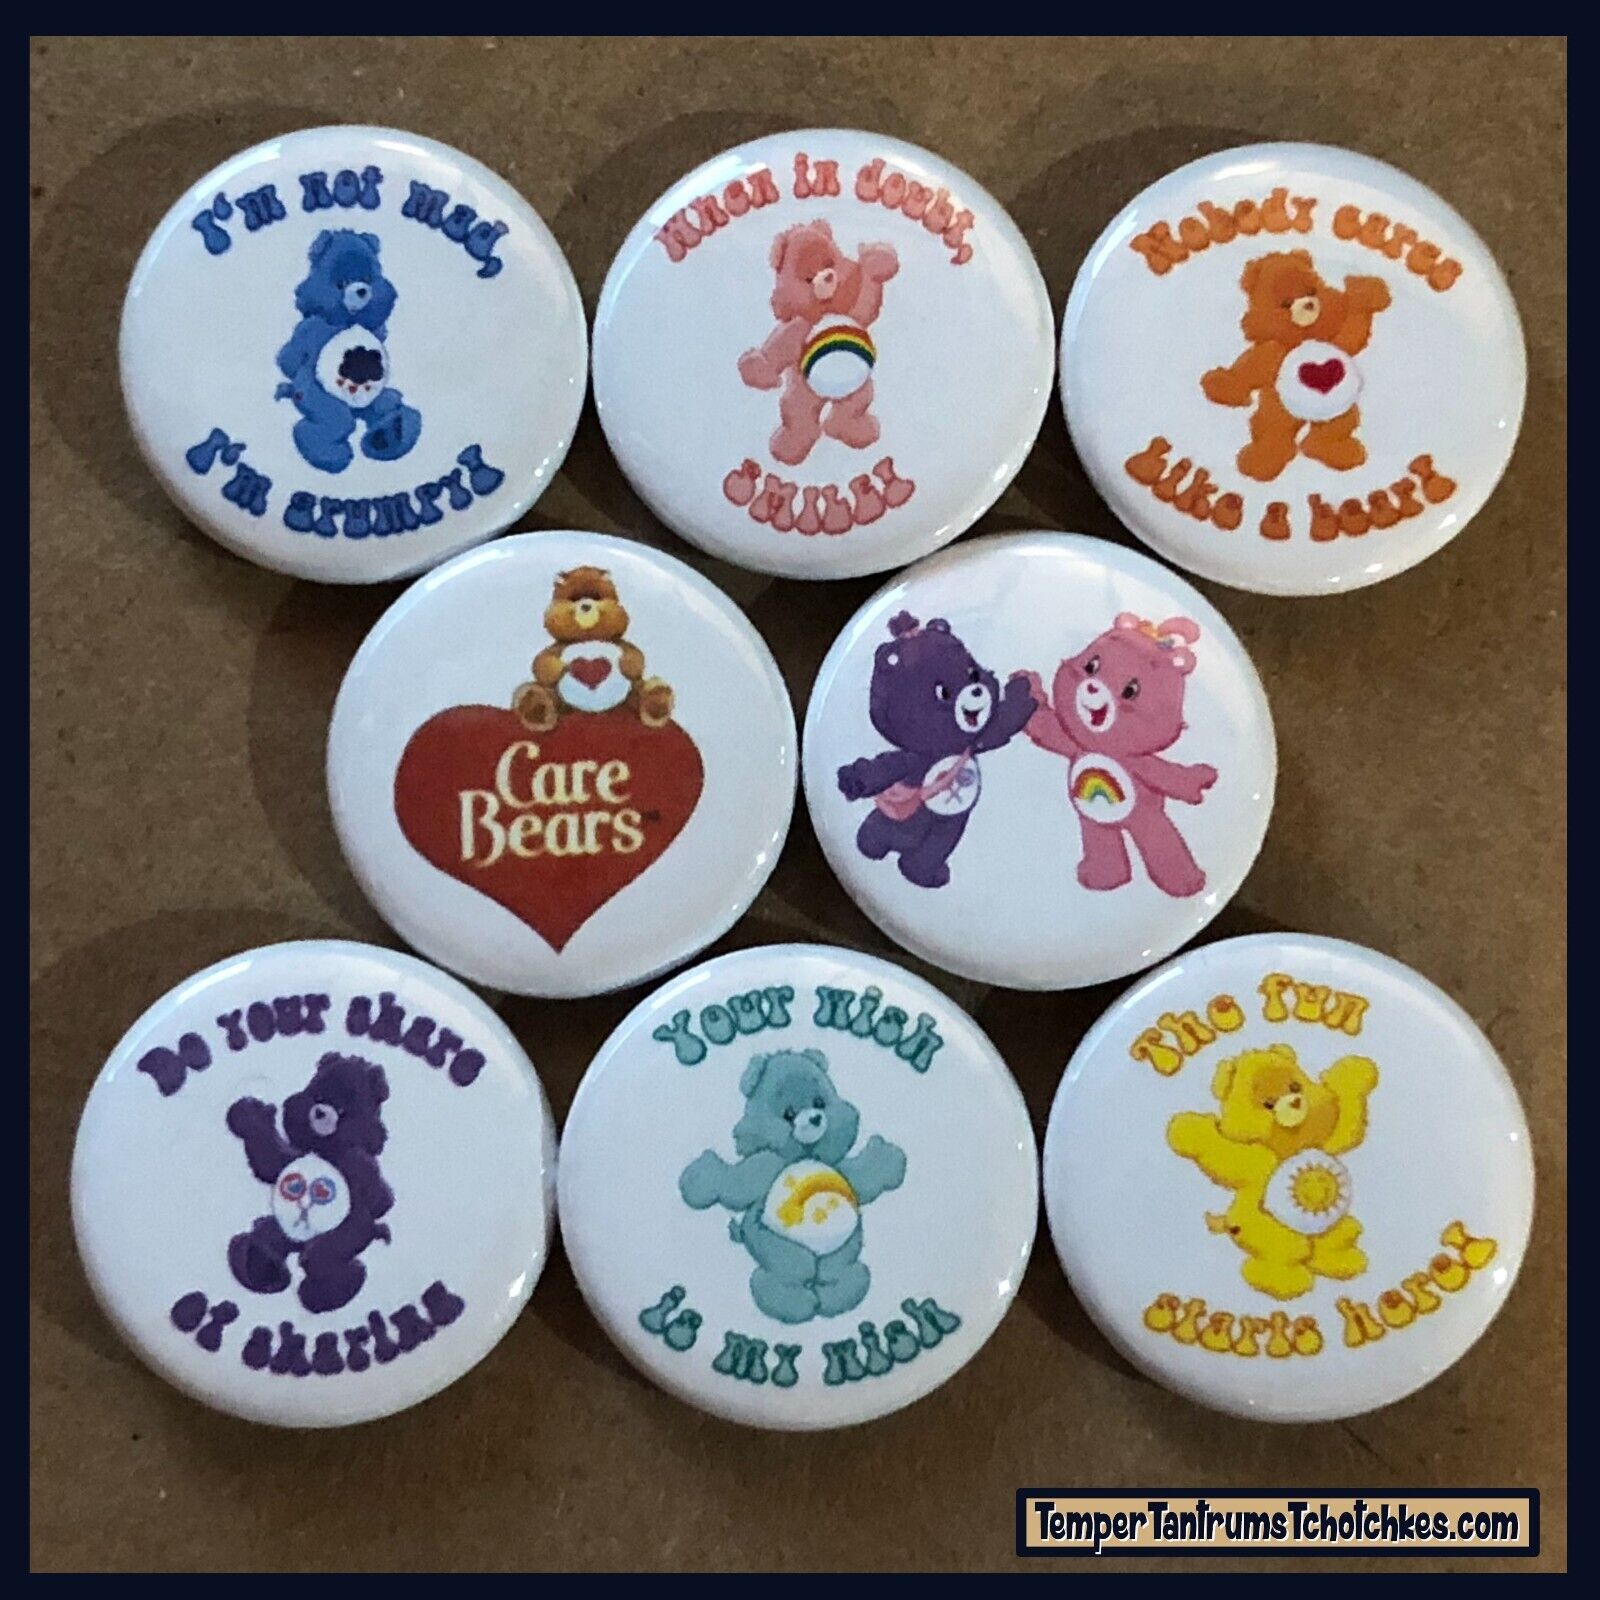 Care Bears -1” Buttons- 8 Pack